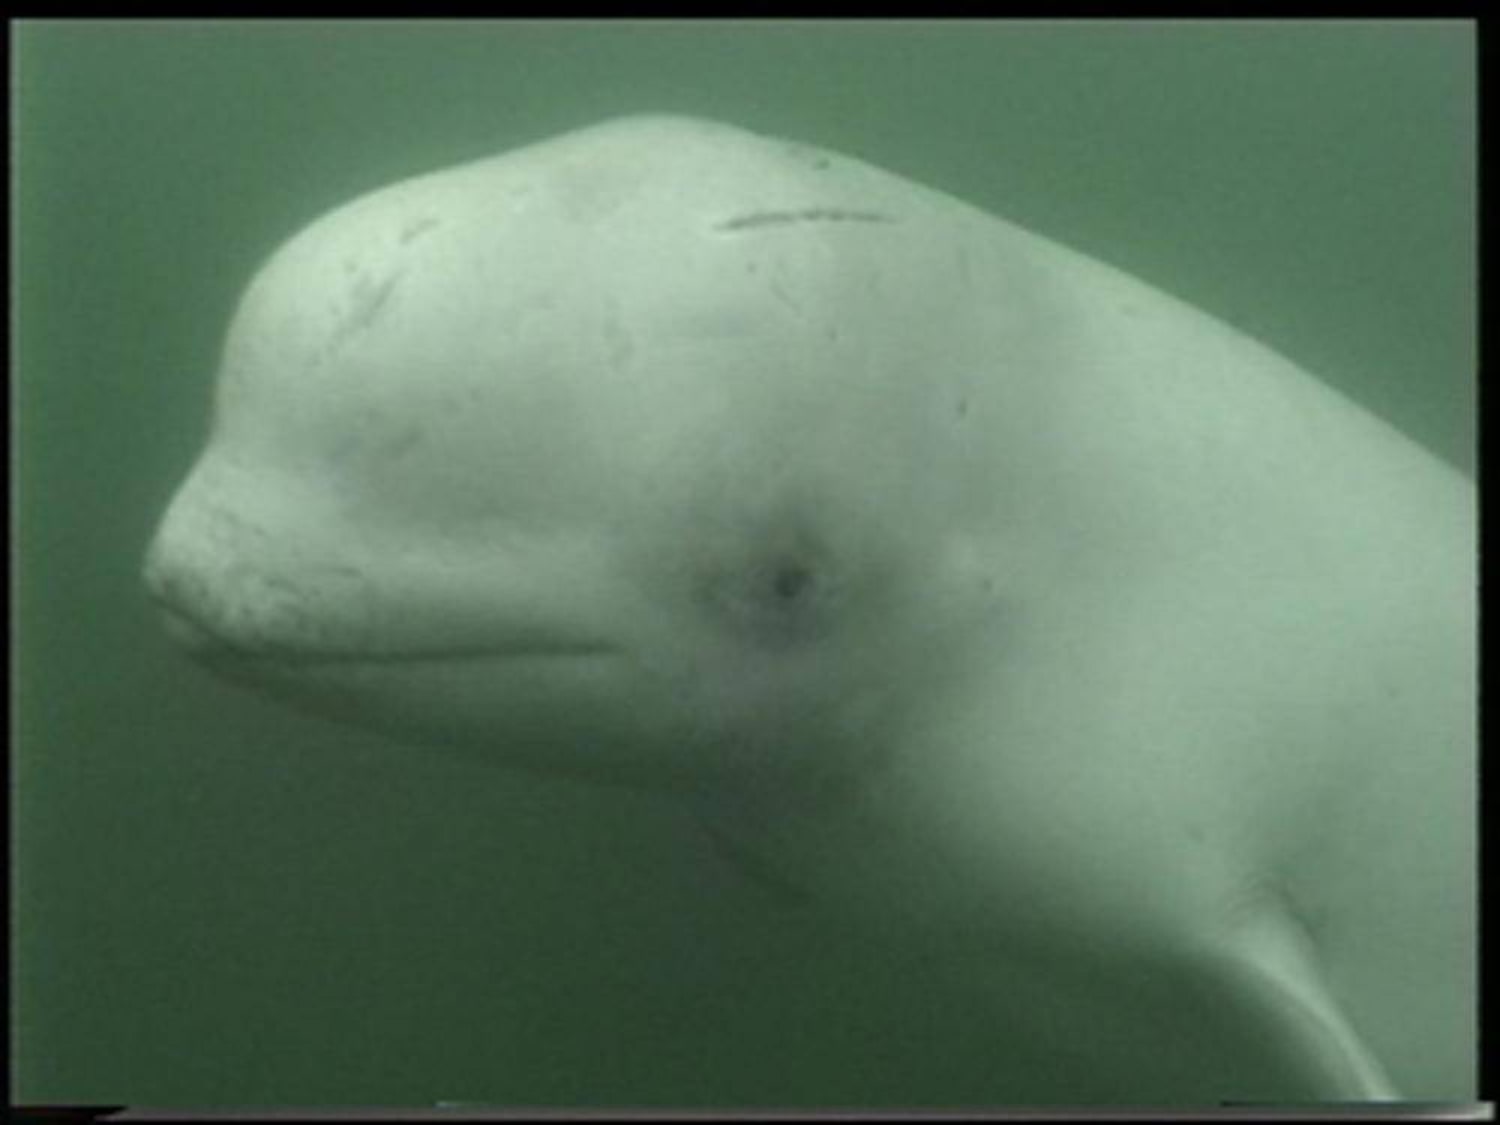 Parasite spread by cats threatens Quebec's endangered belugas